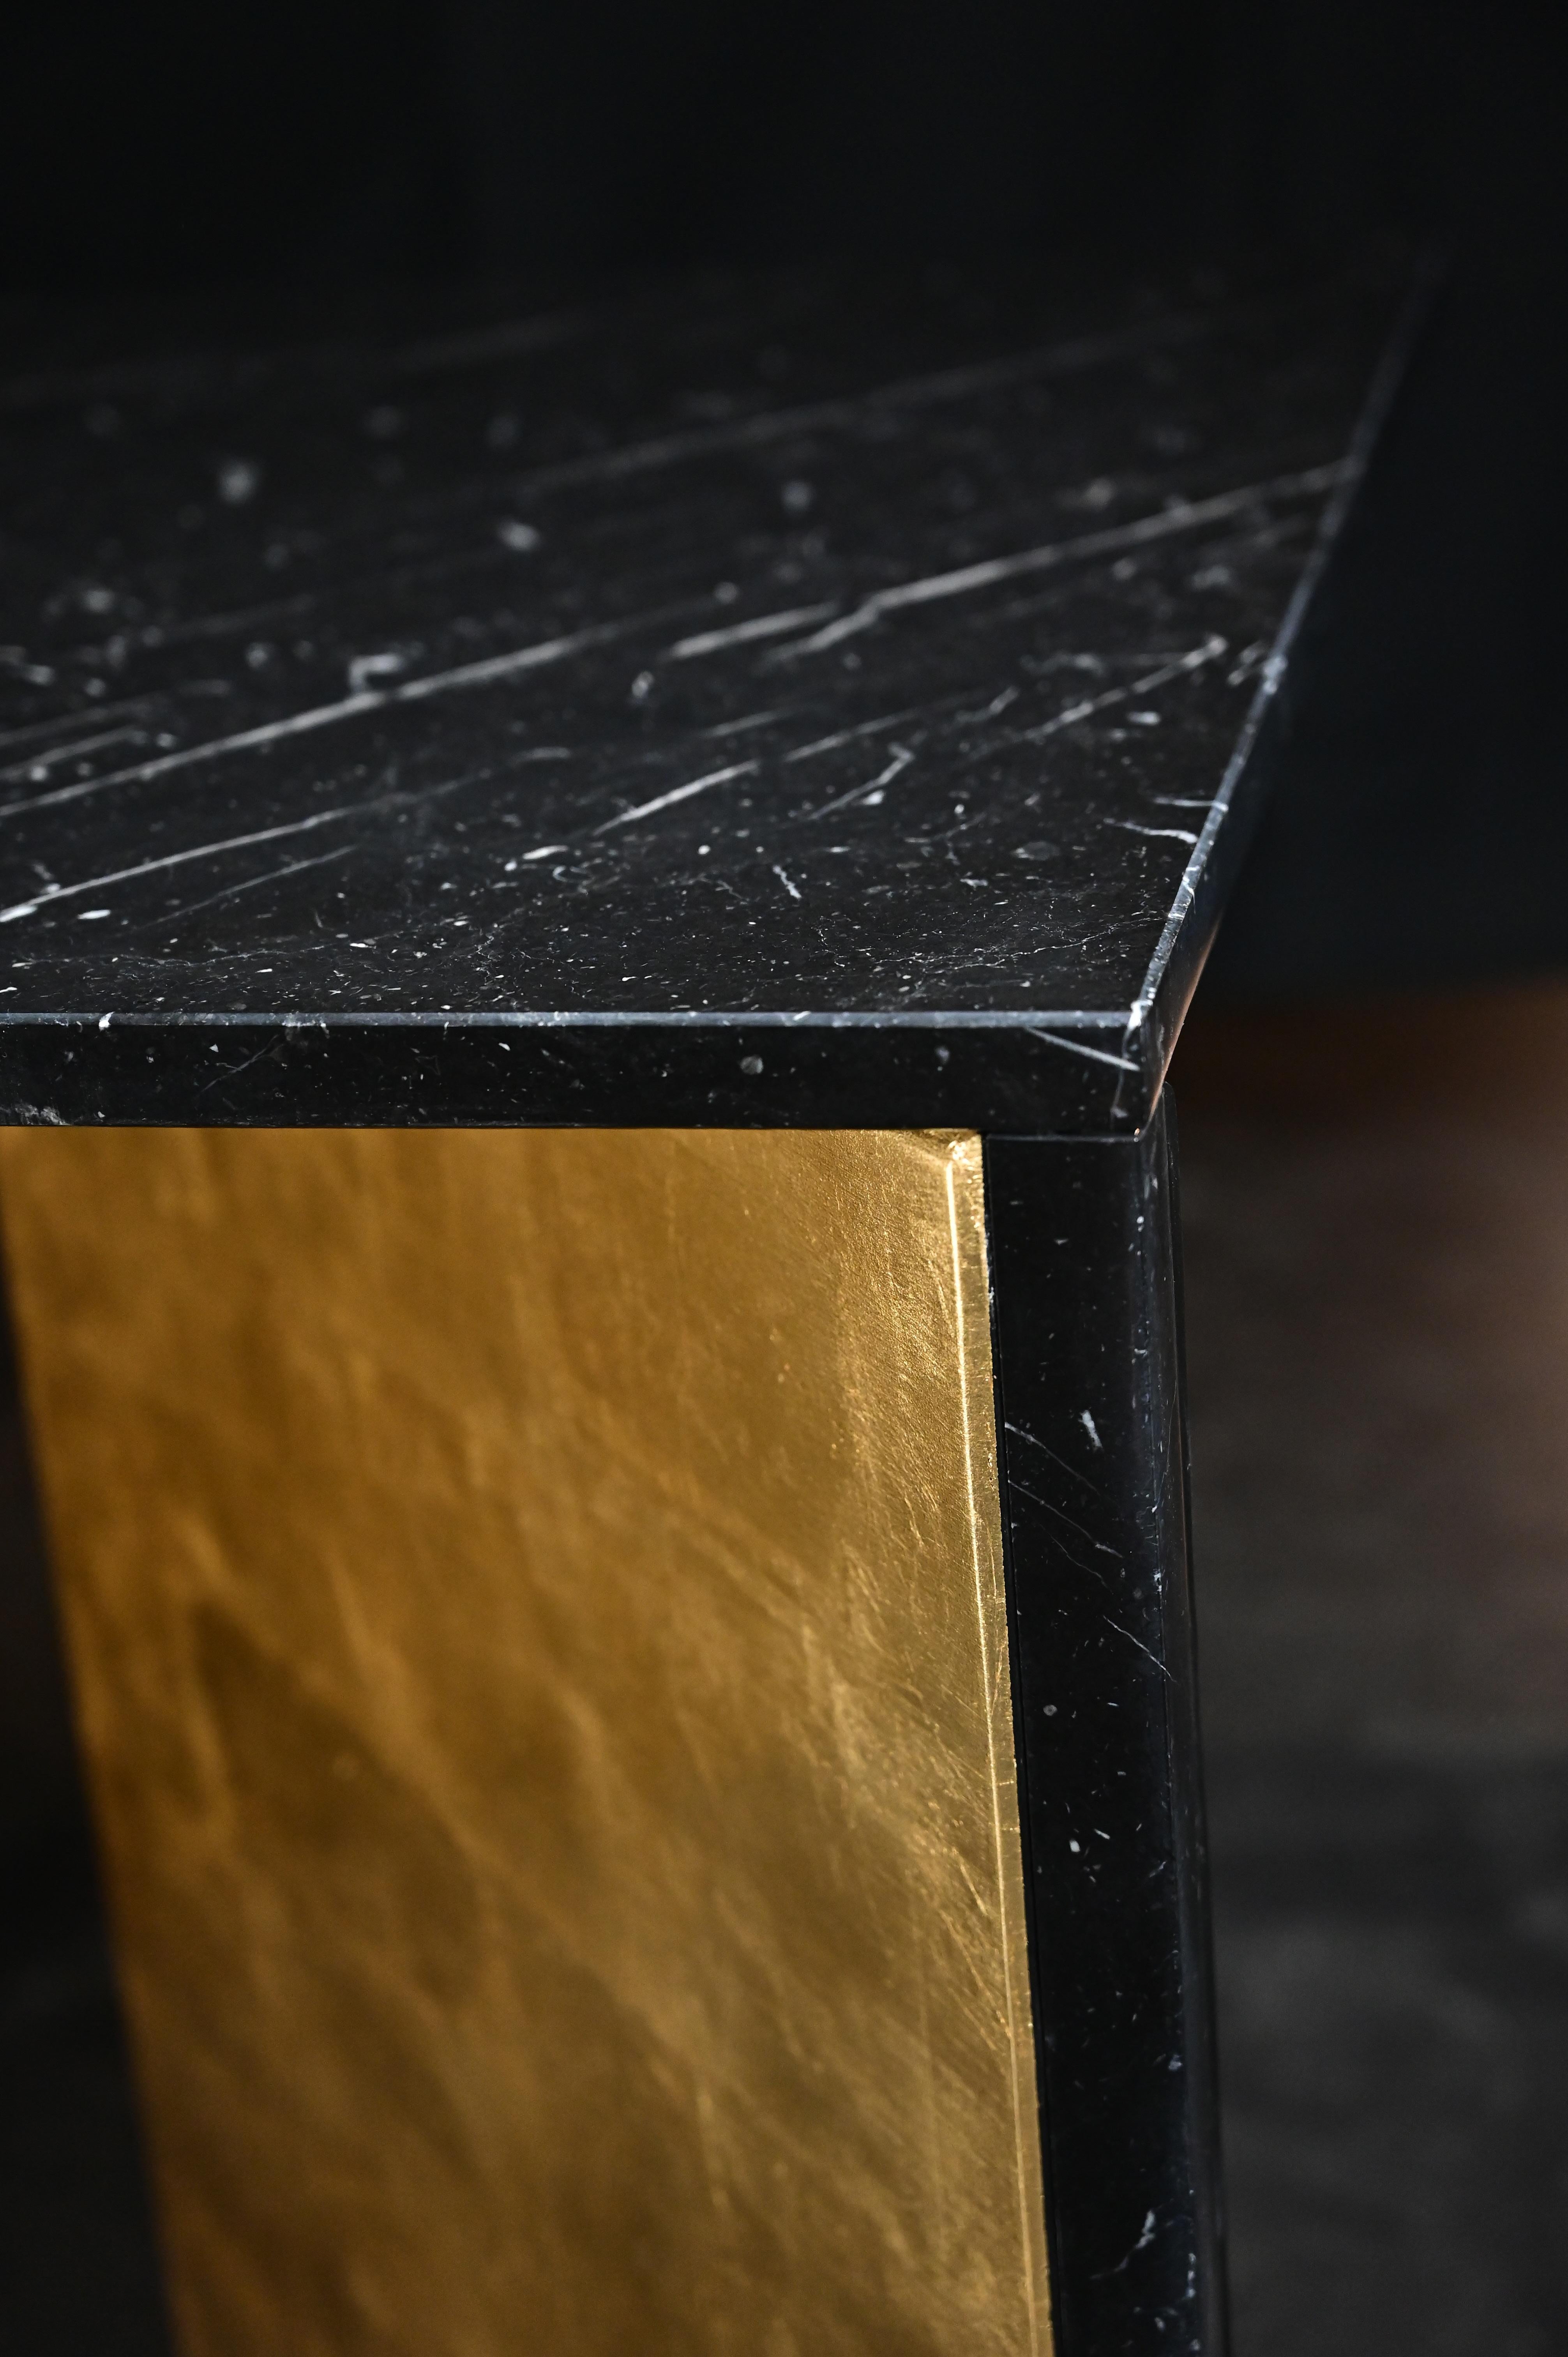 Appliqué Scorcio - Nero Marquinia Dining Table and Gold leaf By DFdesignlab Made in Italy For Sale